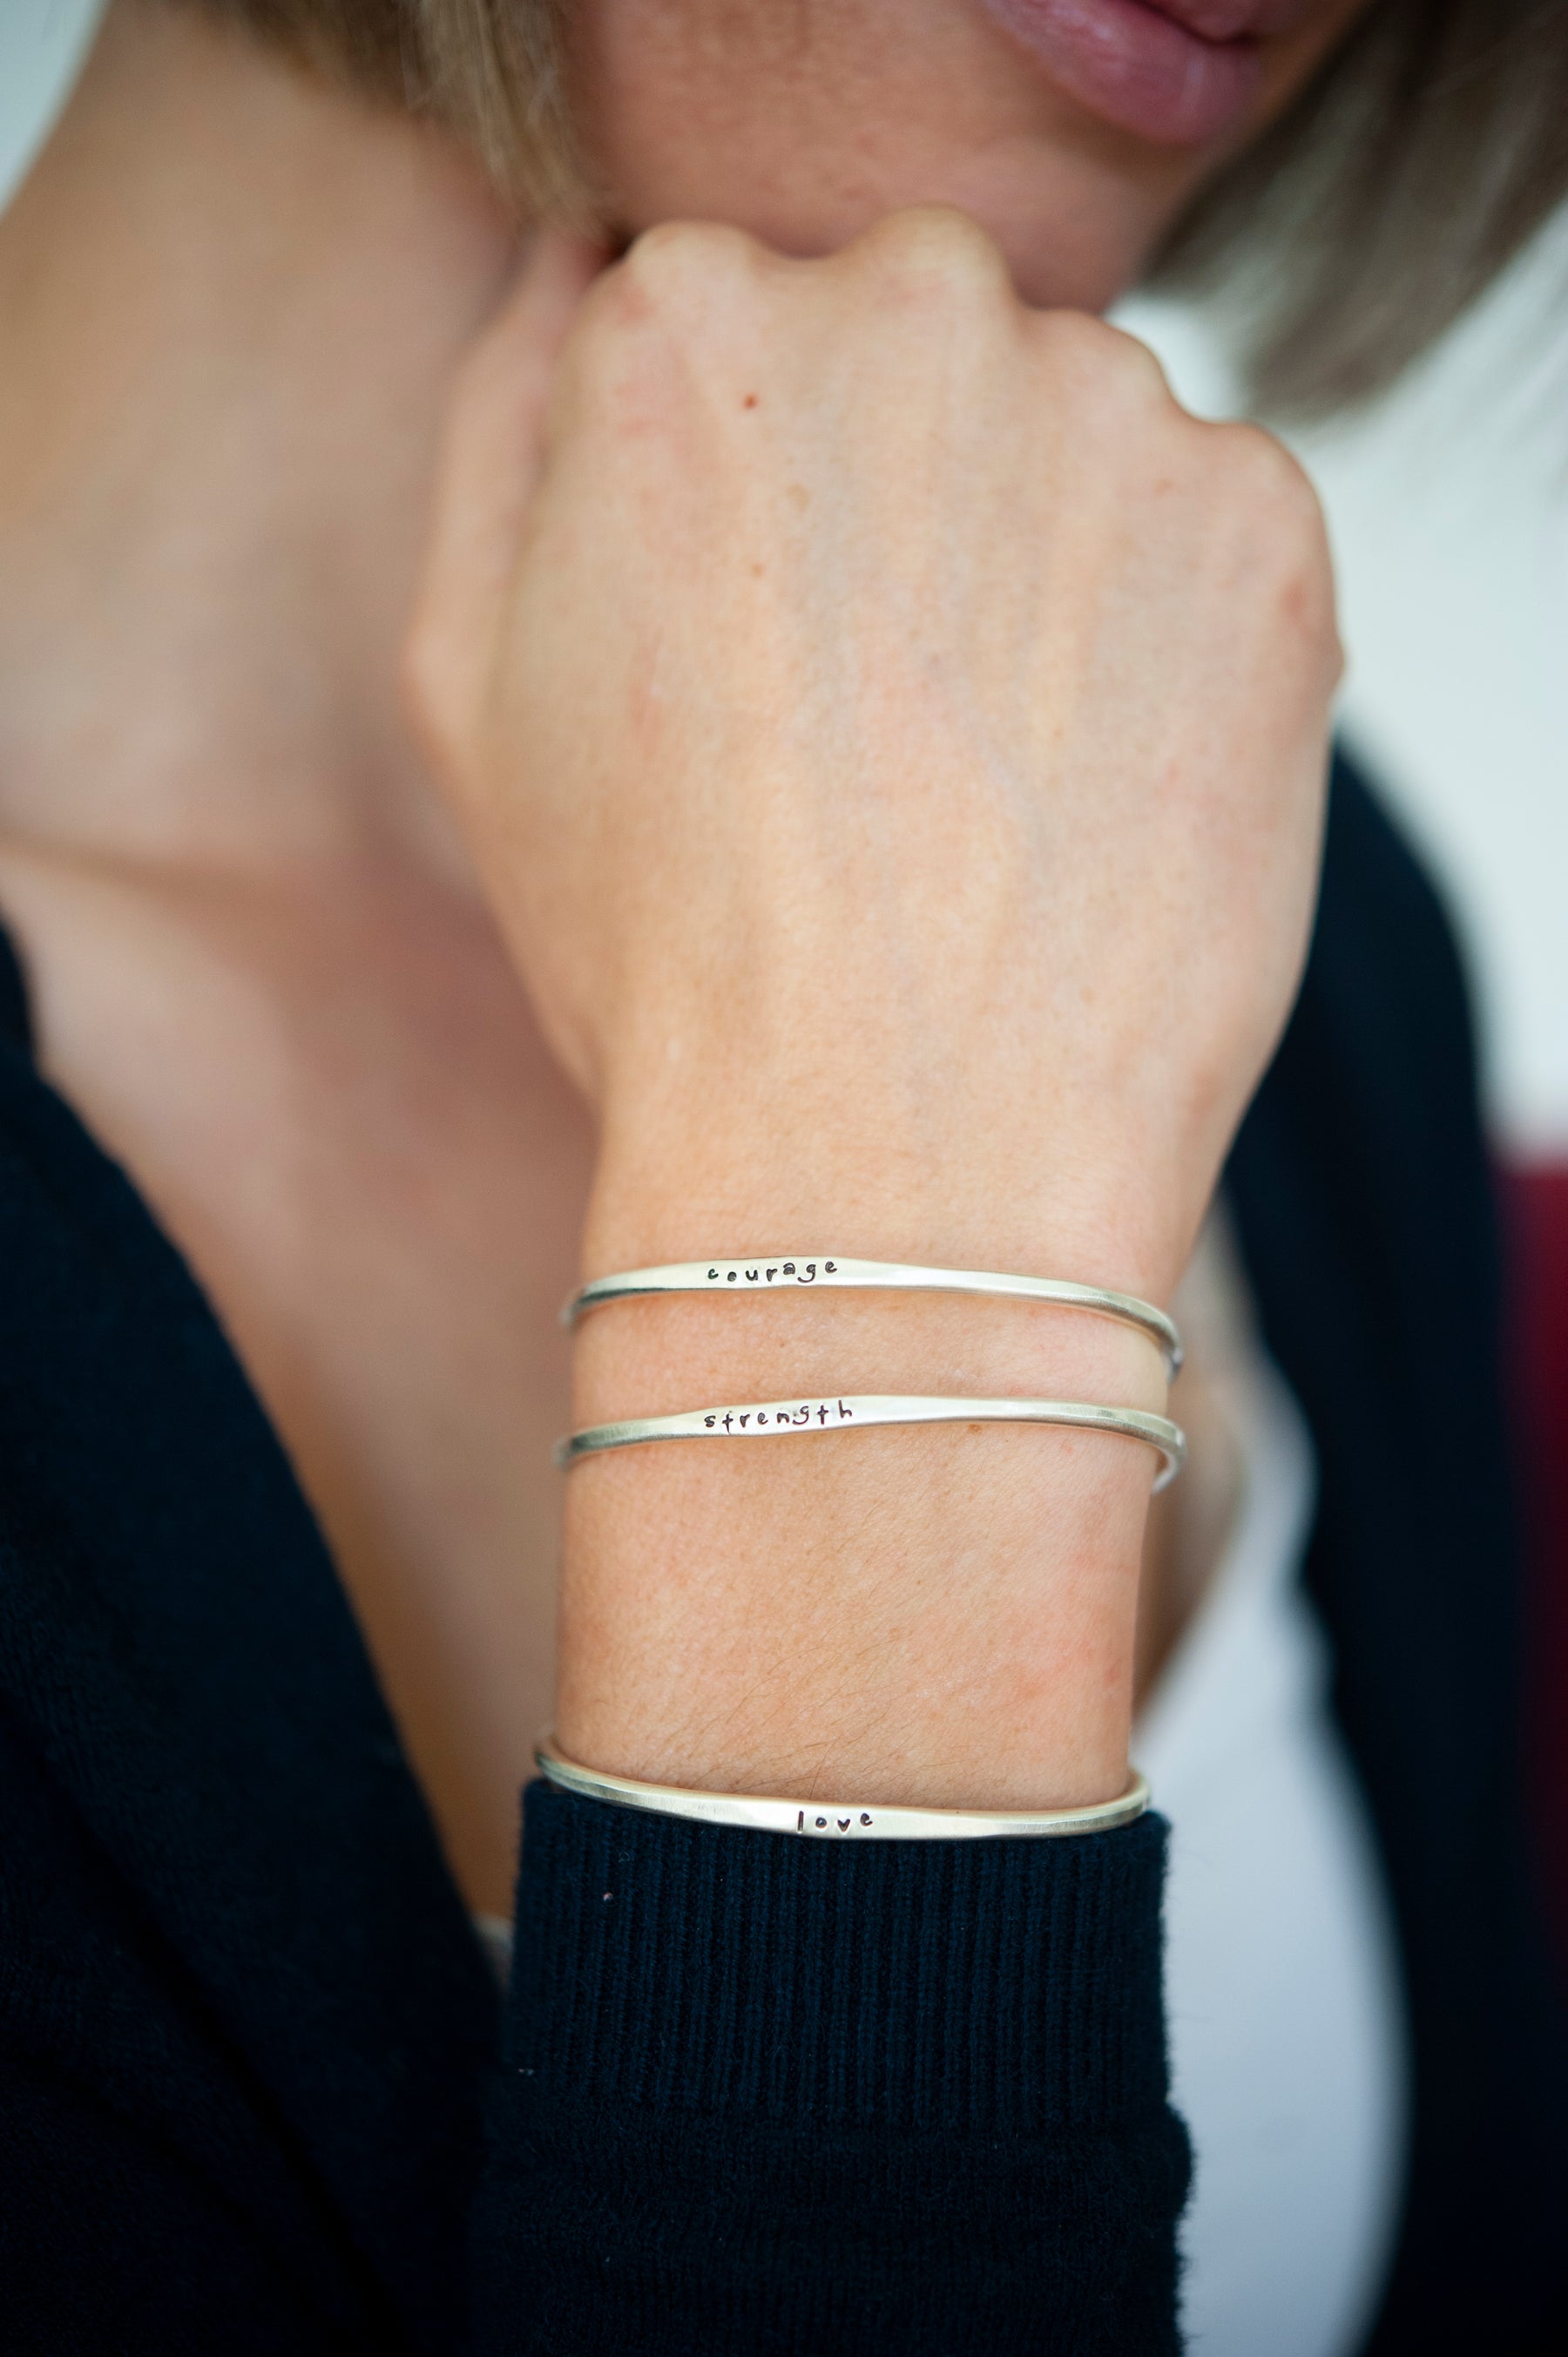 The Power of Words Silver Stacking Cuff Bracelet